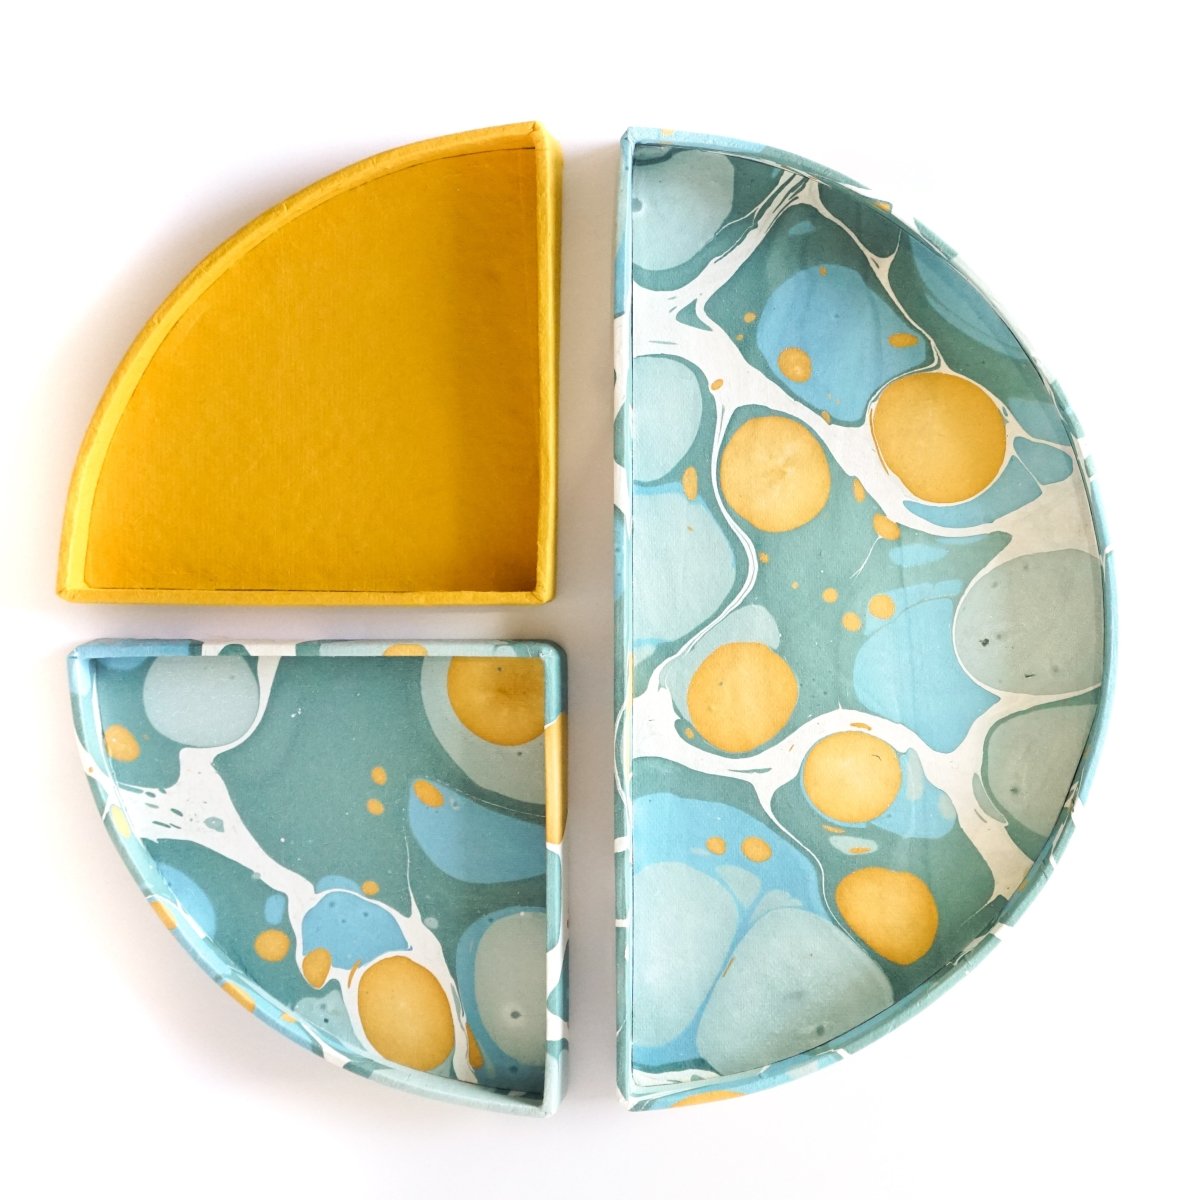 Load image into Gallery viewer, Tabletop Decor Bento Tray Blue Mustard -